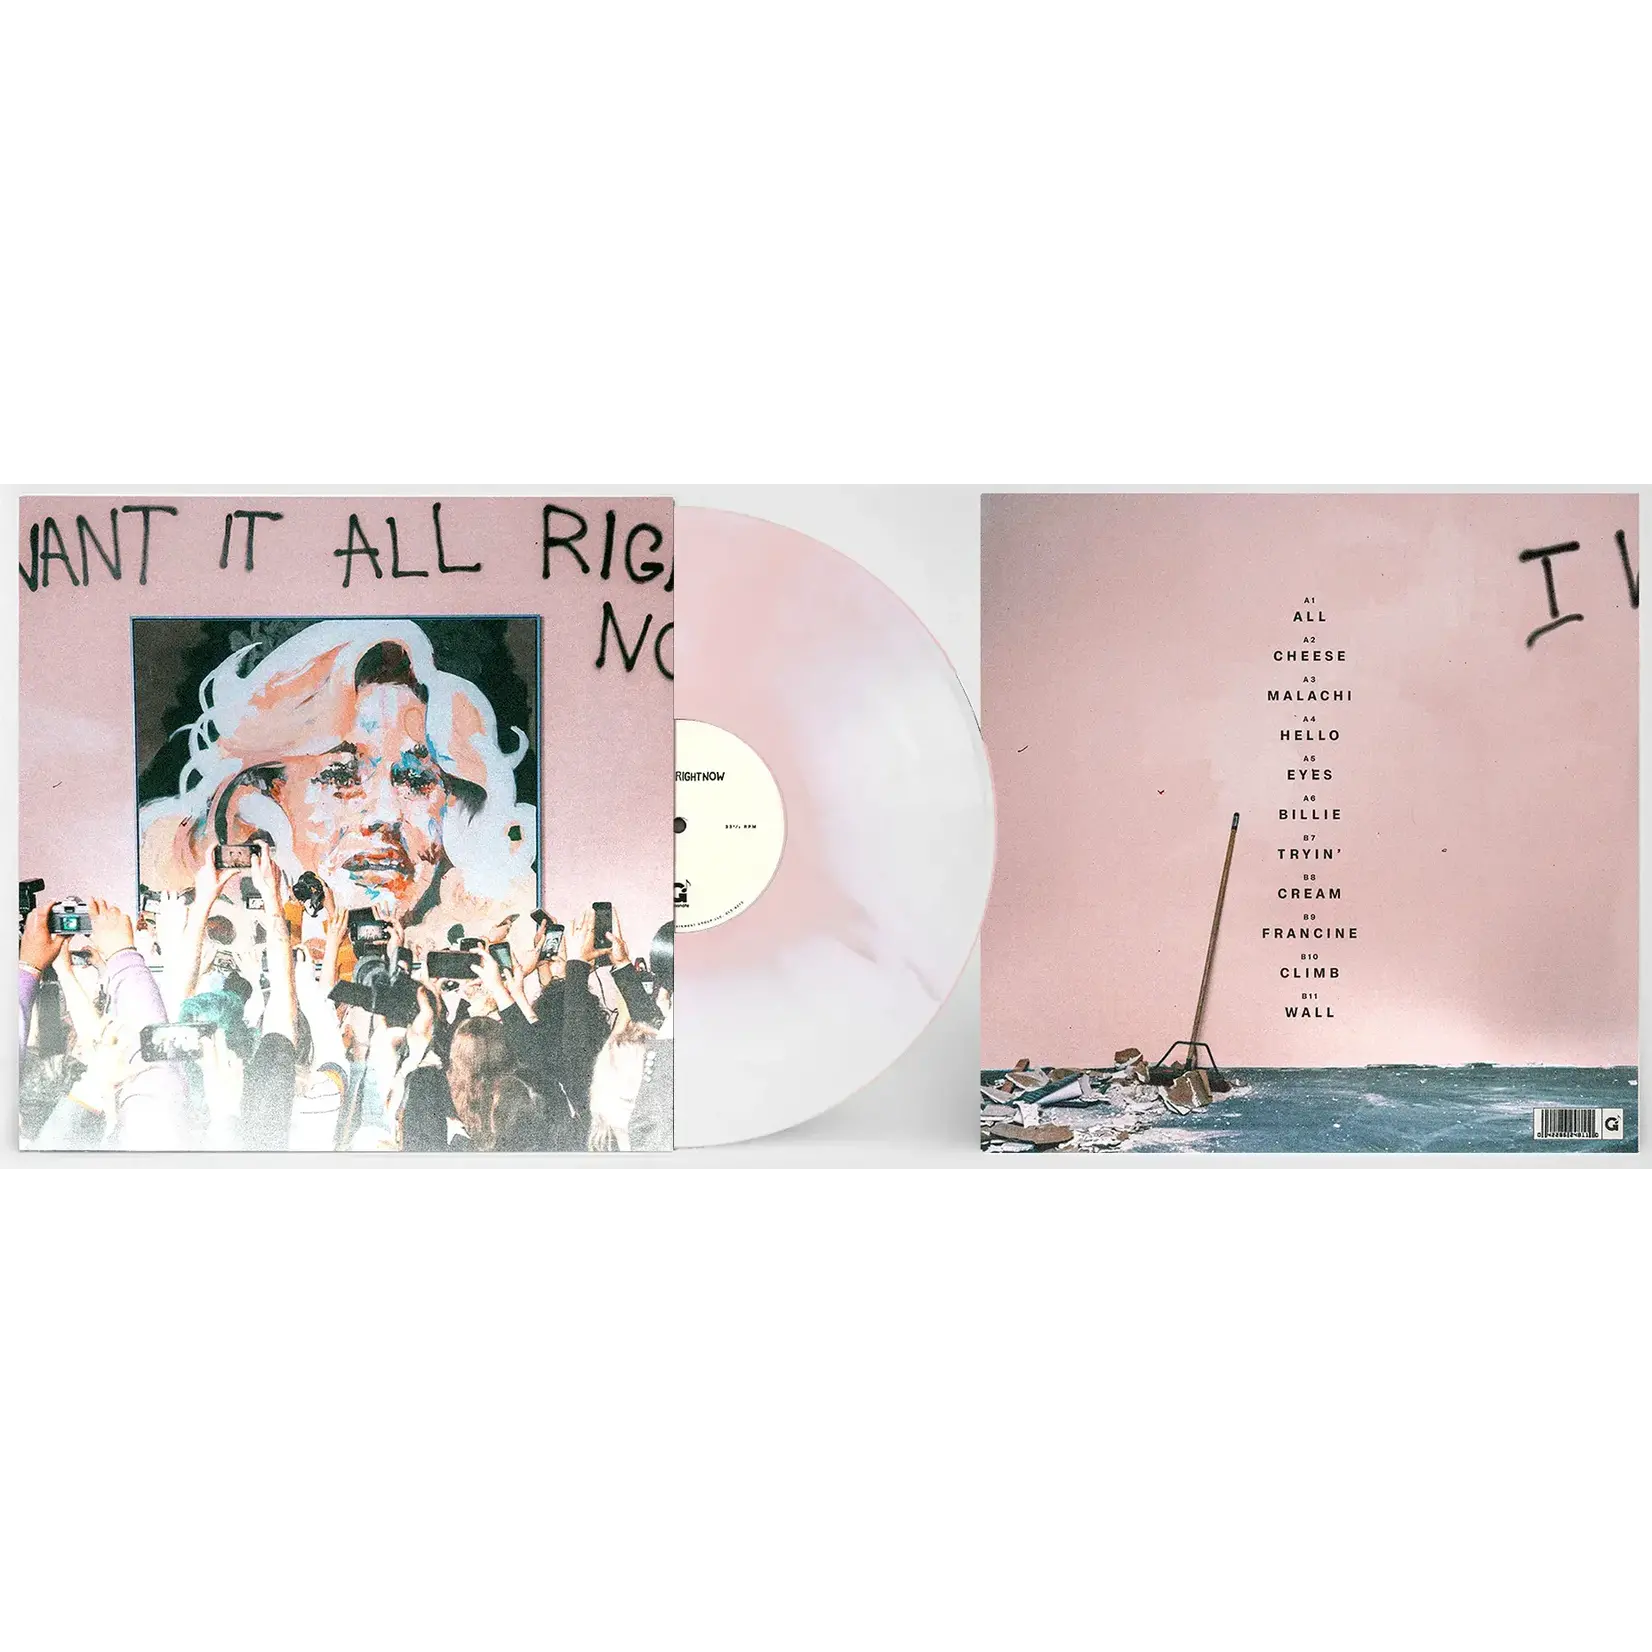 Glassnote Grouplove - I Want It All Right Now (LP) [Pink/White]